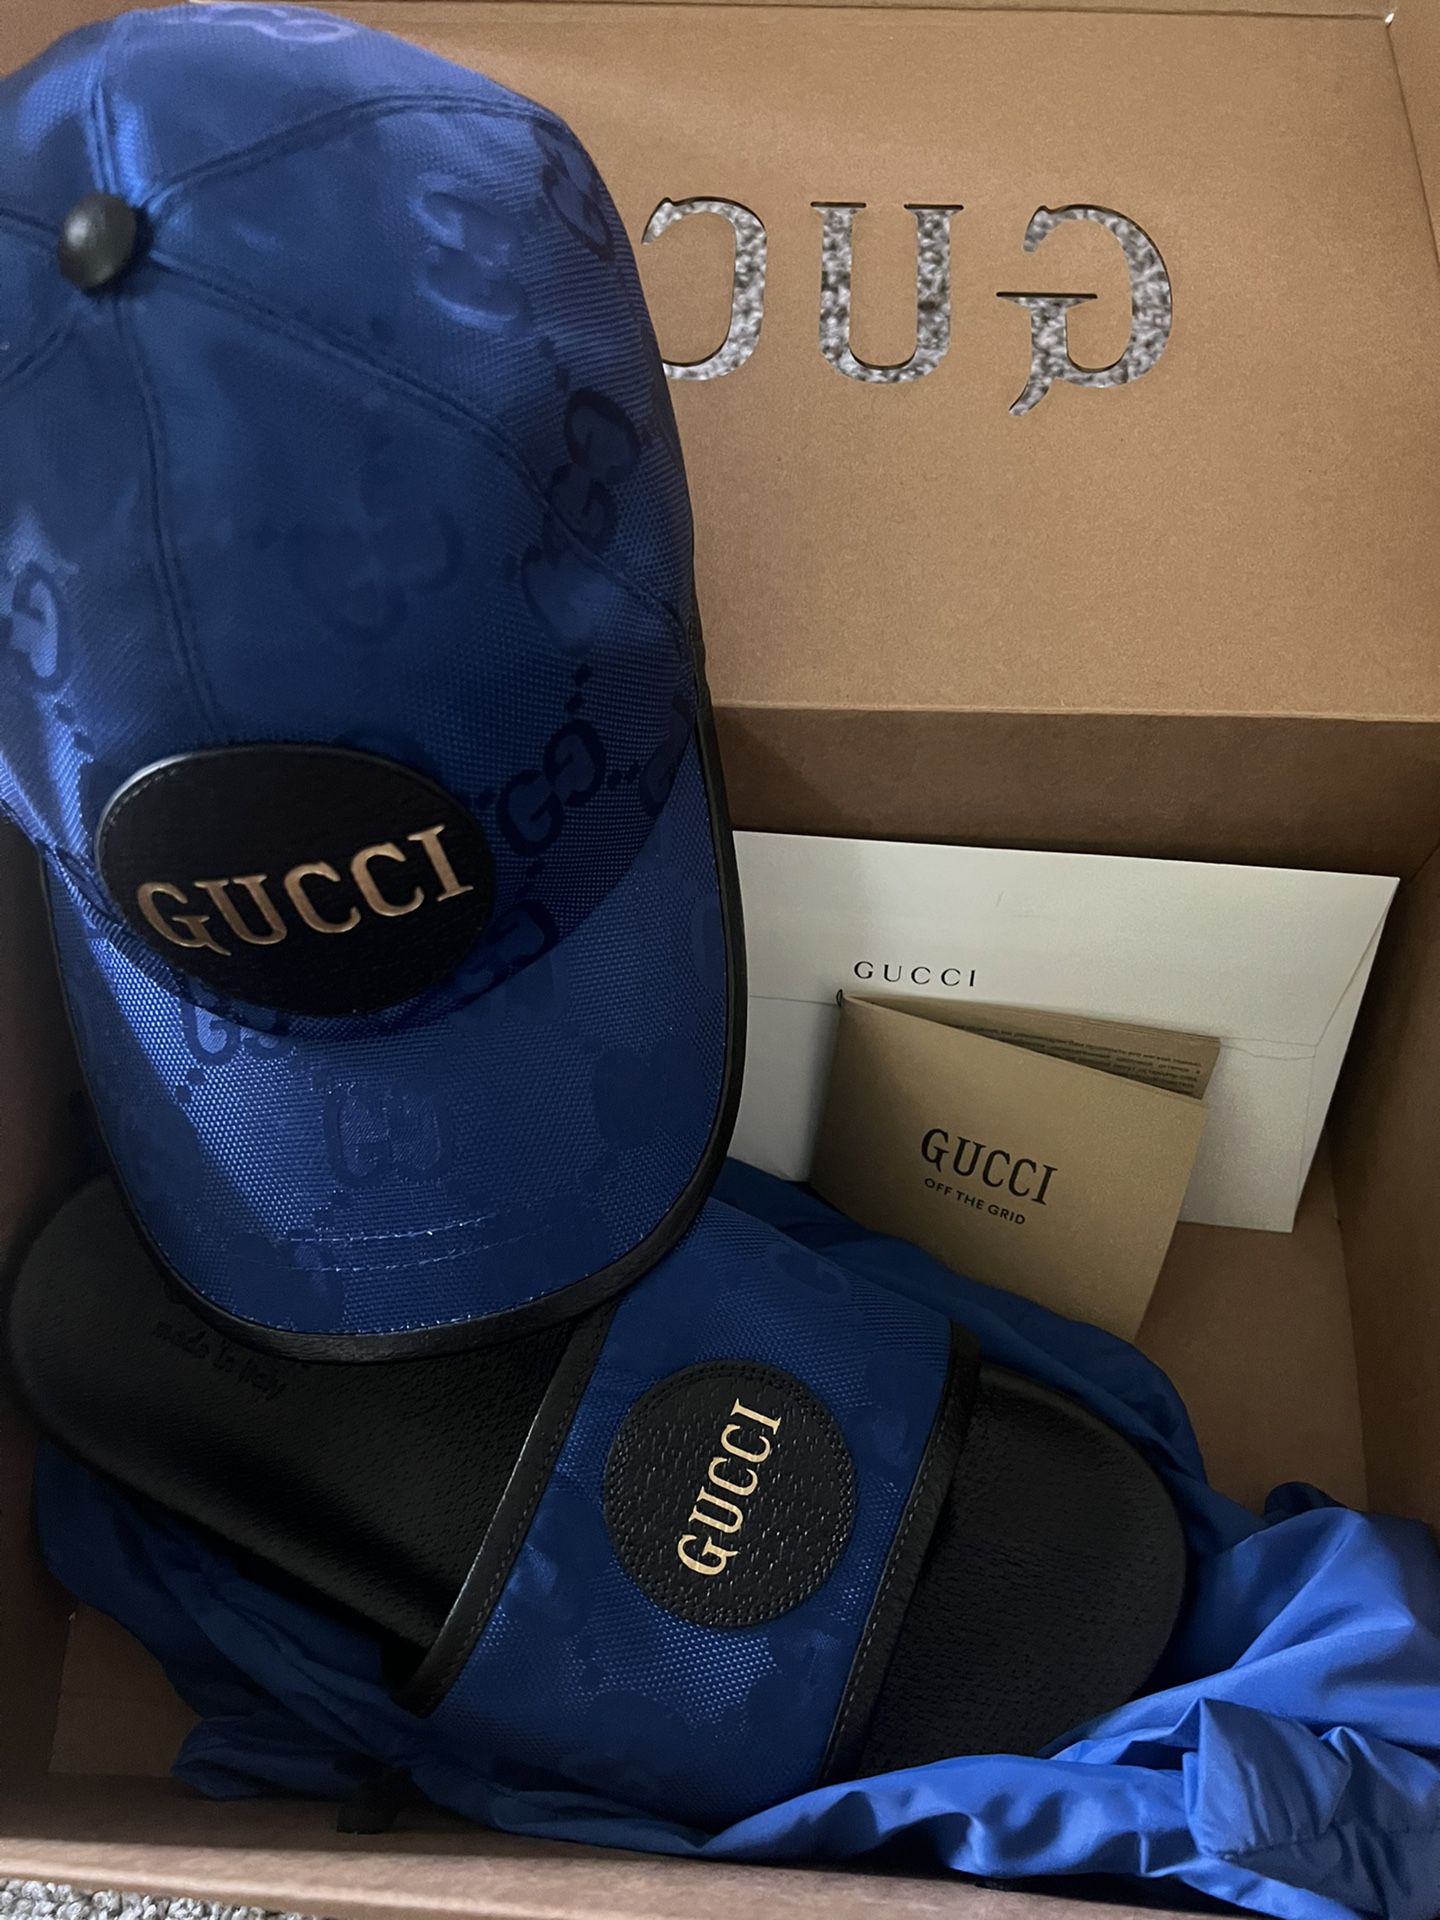 Gucci hat with matching sandals